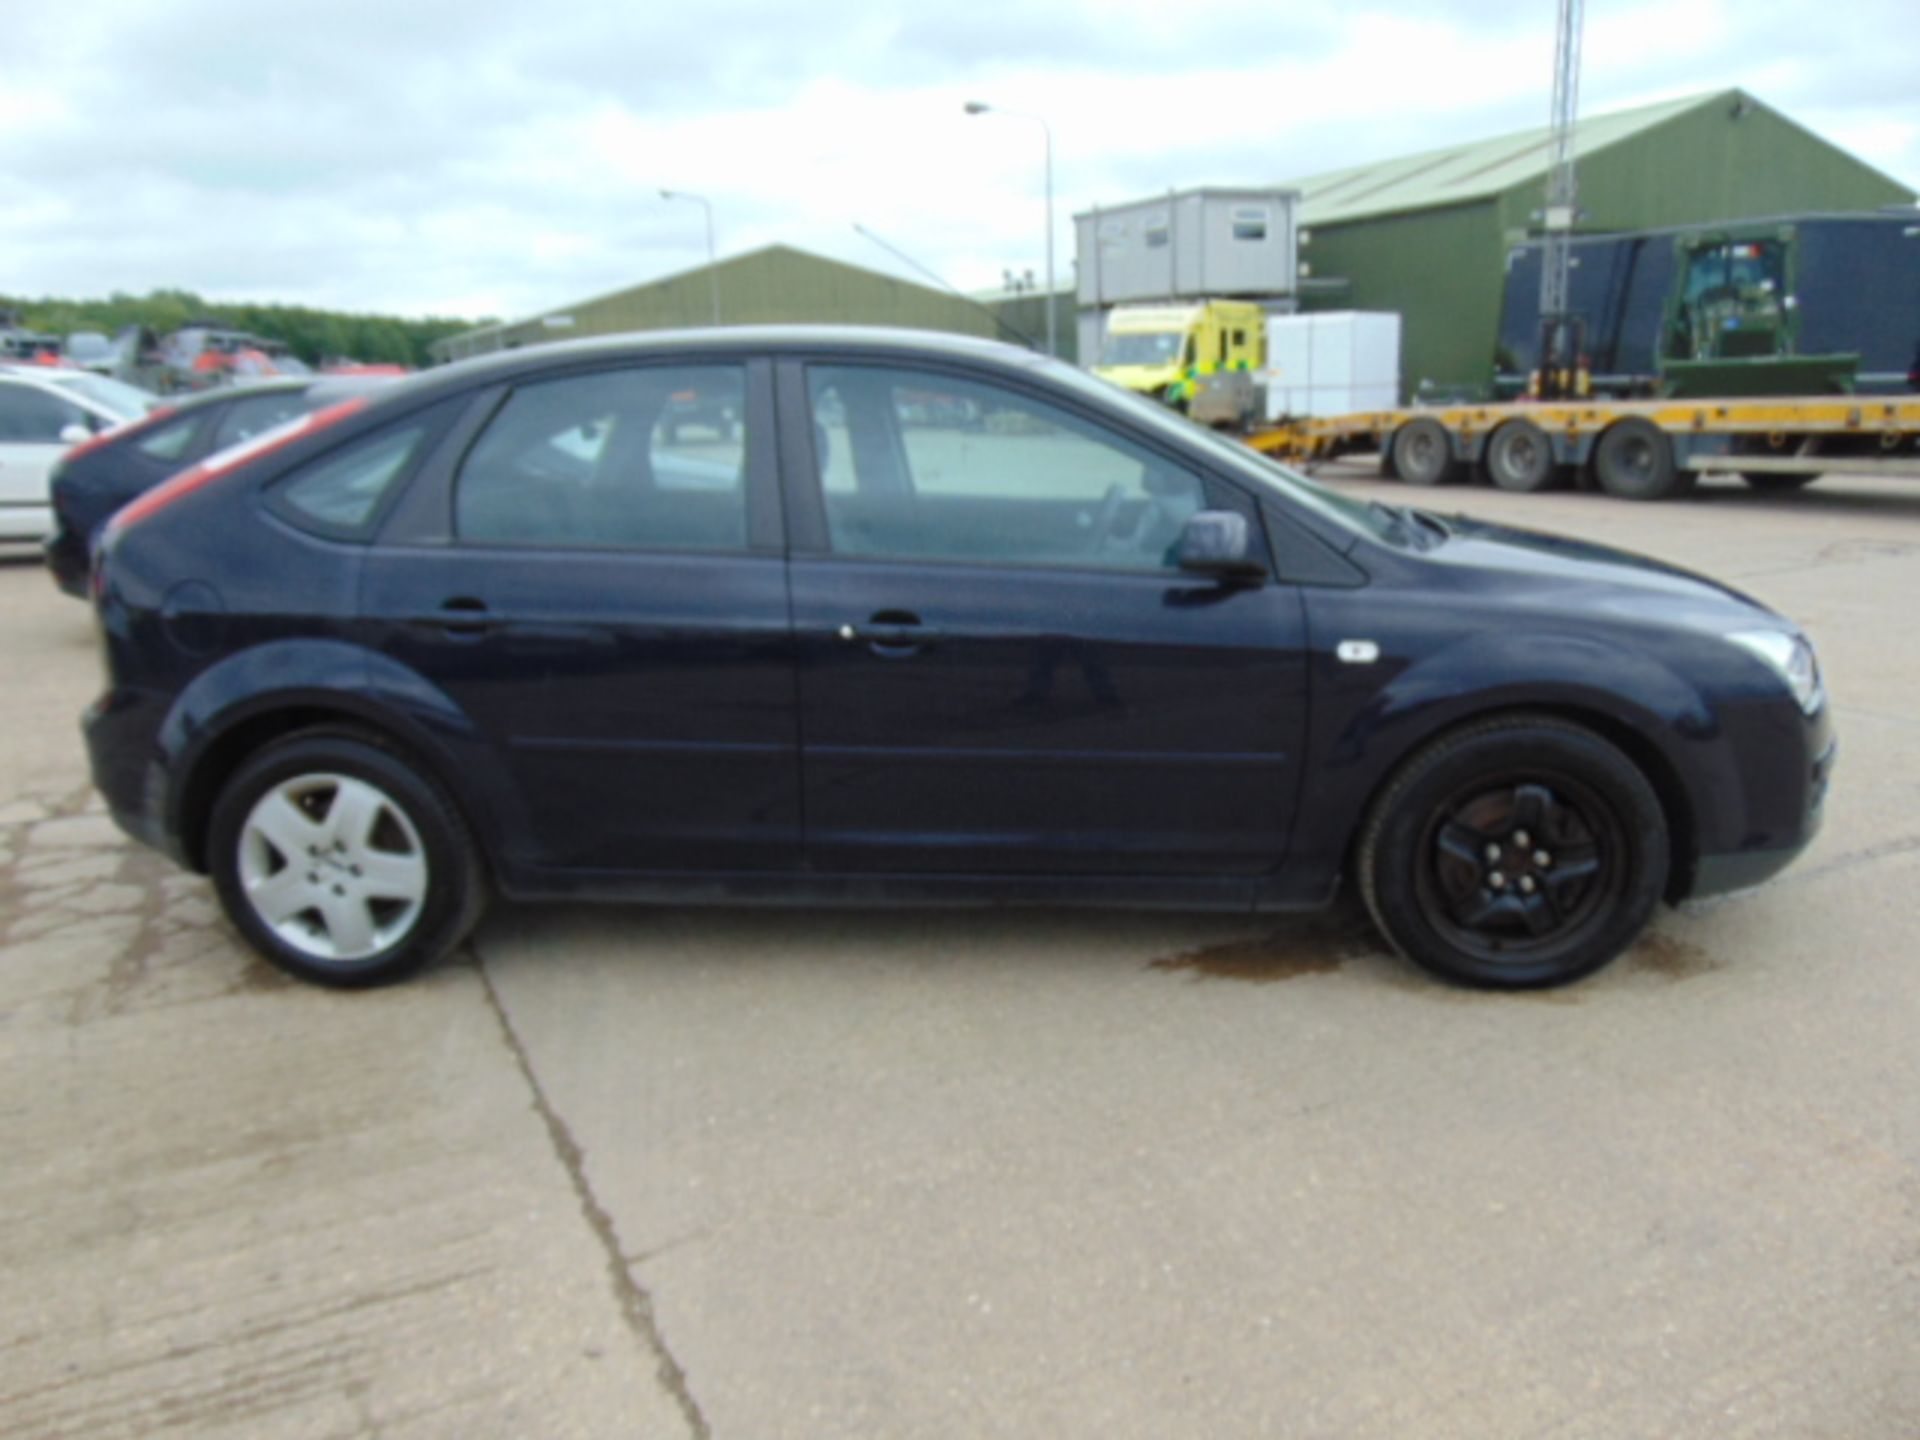 2008 Ford Focus 1.8 TDCI Style Hatchback - Image 5 of 18